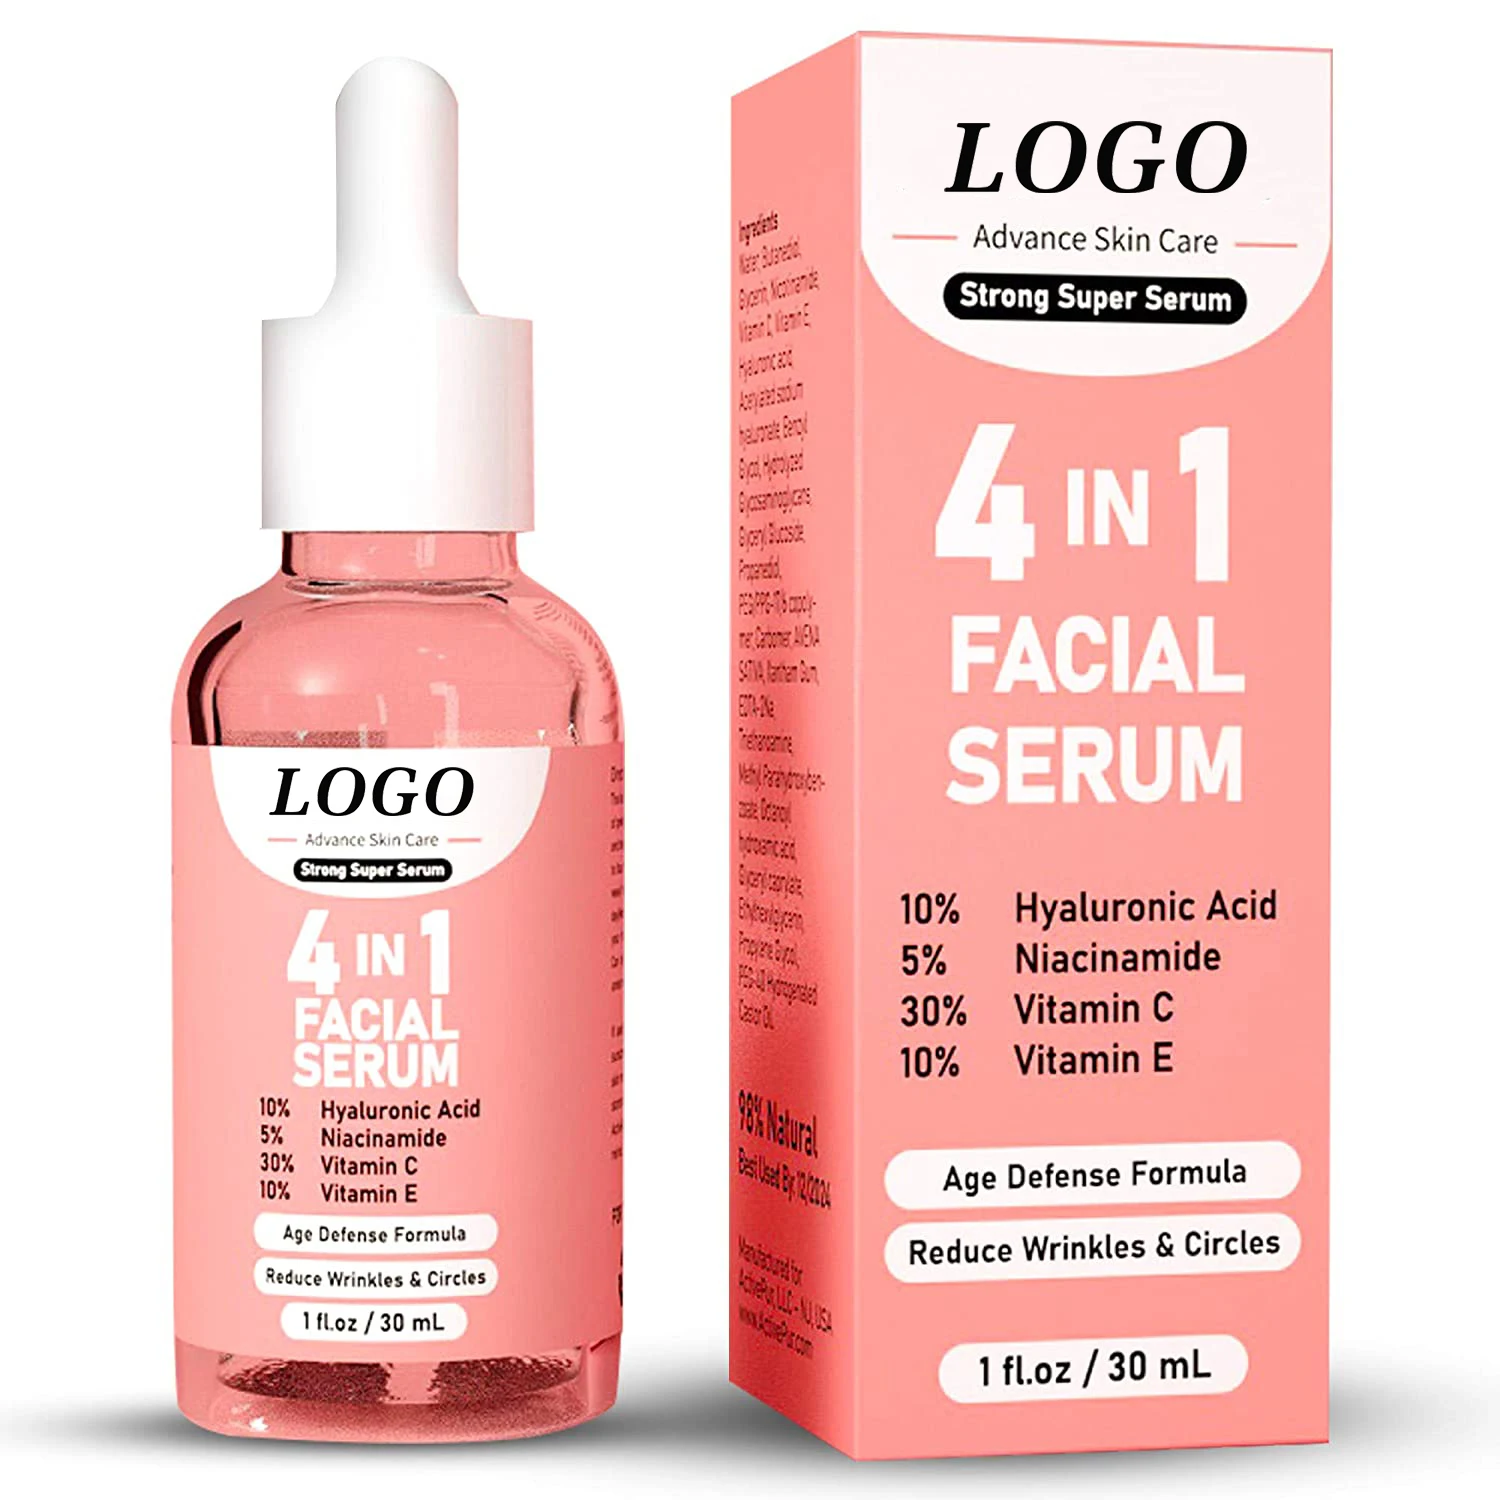 

BLIW Hot Sale 4 in 1 Collagen Hyaluronic Acid 30% Vitamin C Serum With HA Vitamin E Nicotinamide Whitening Face Serum